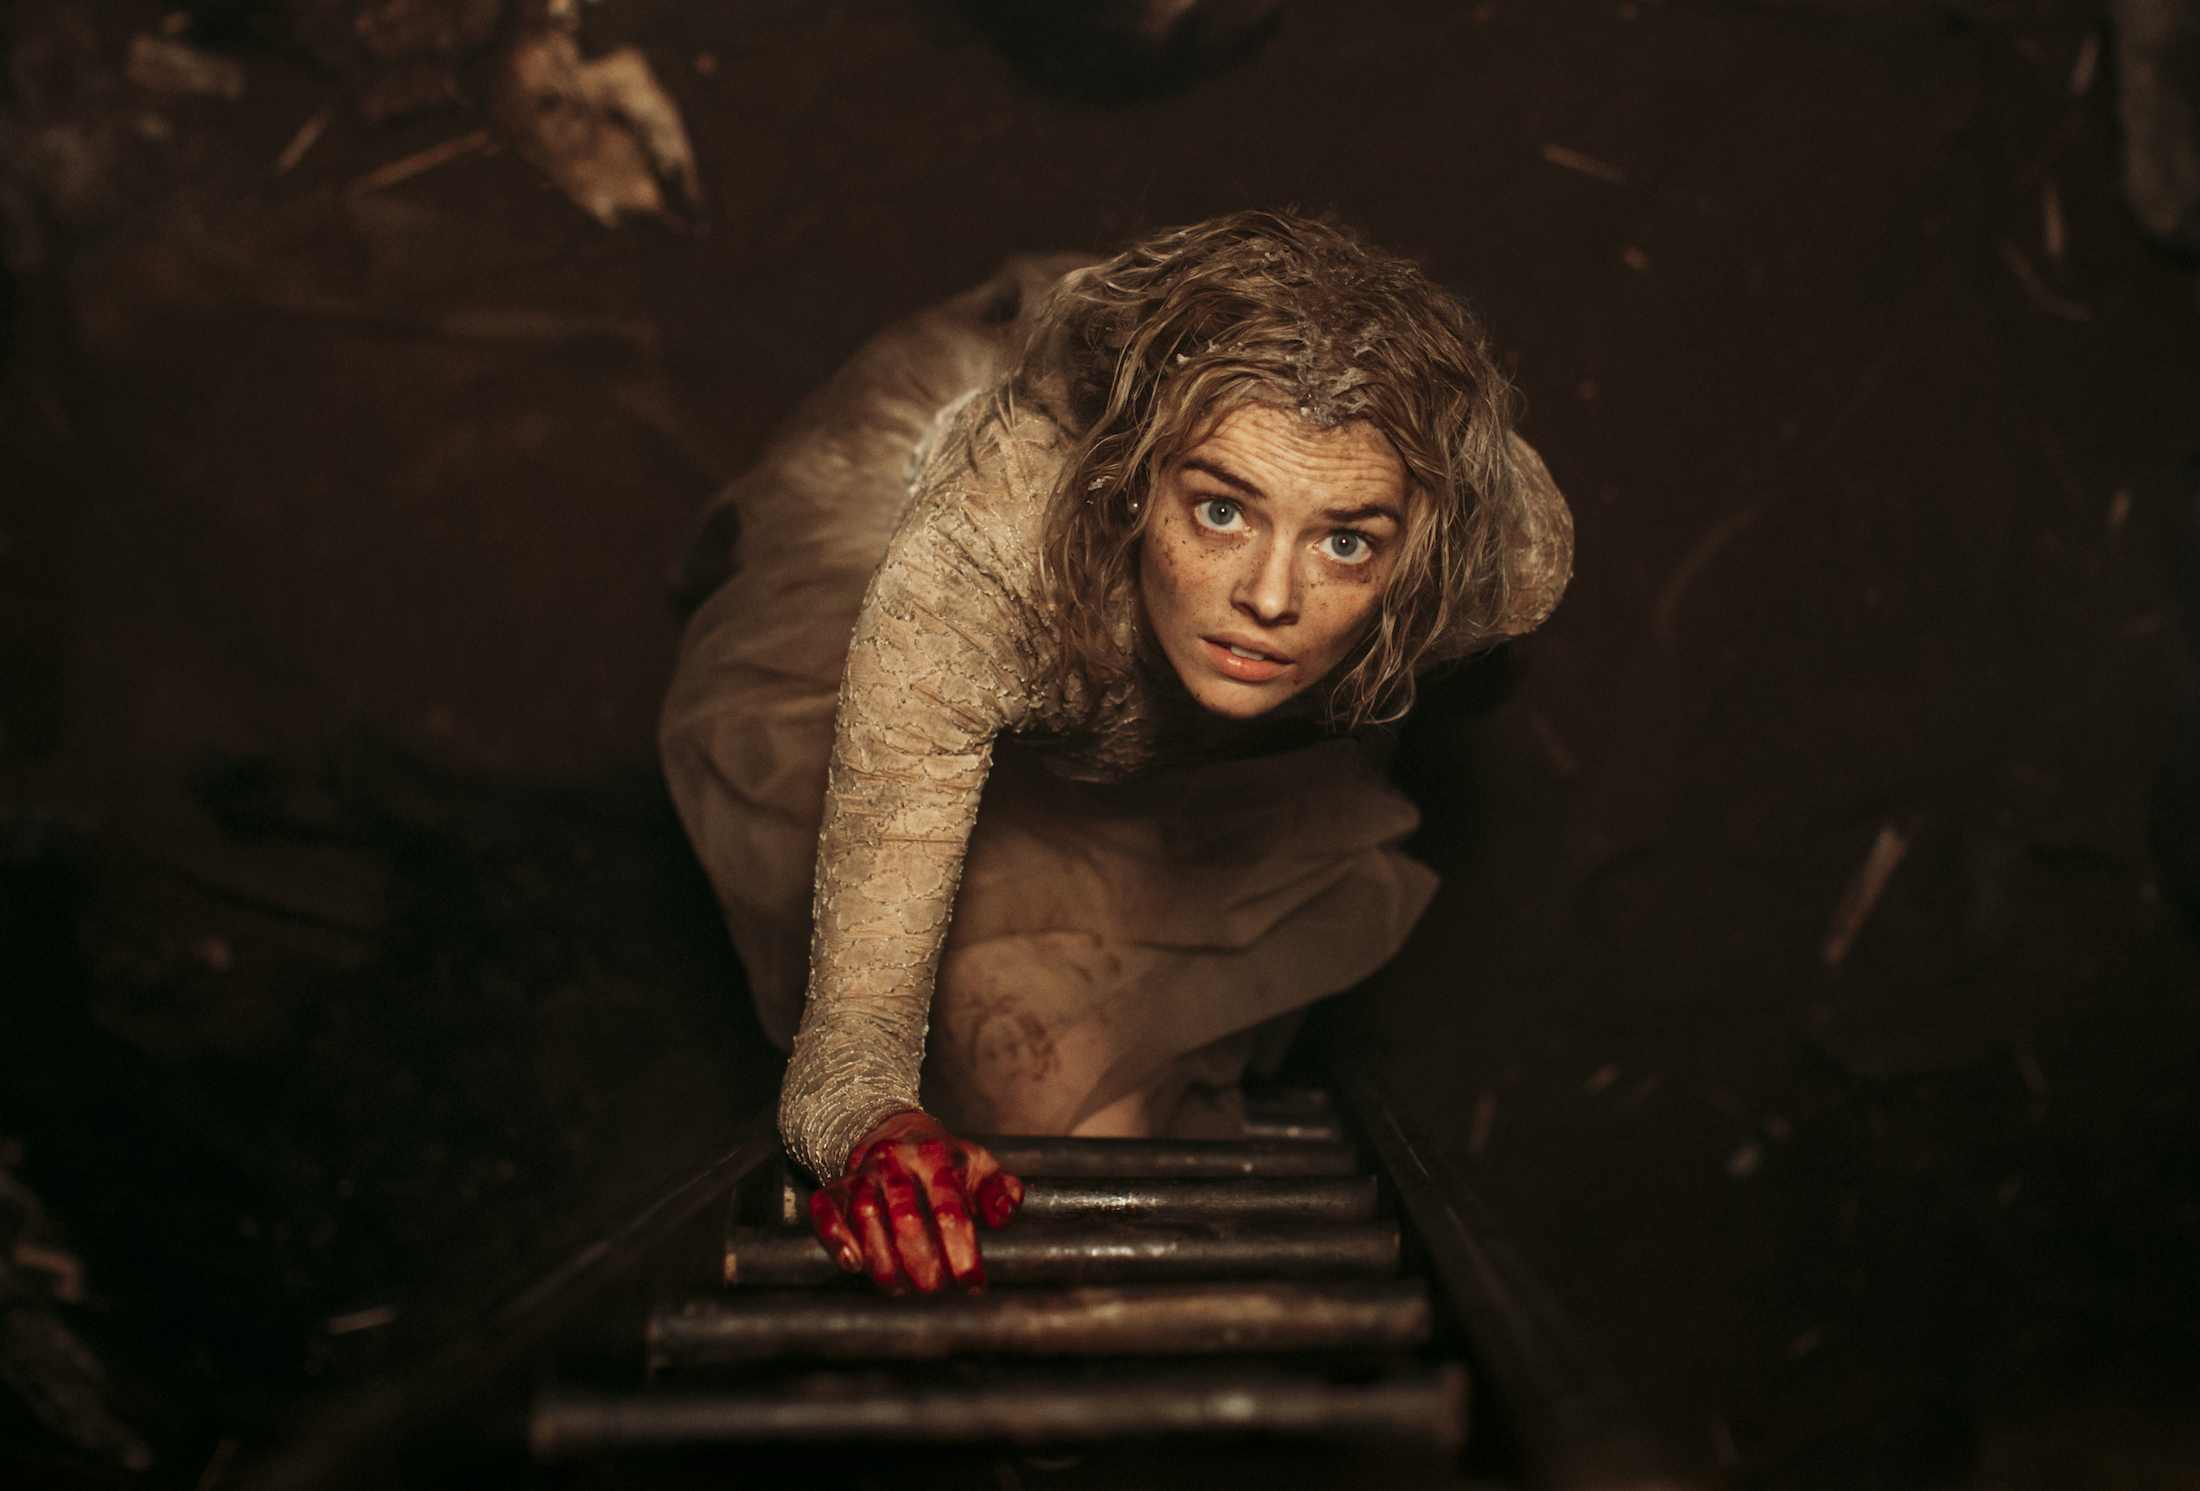 Grace (Samara Weaving) looks up a ladder, holding the first rung with her bloody hand in a shot from Ready or Not